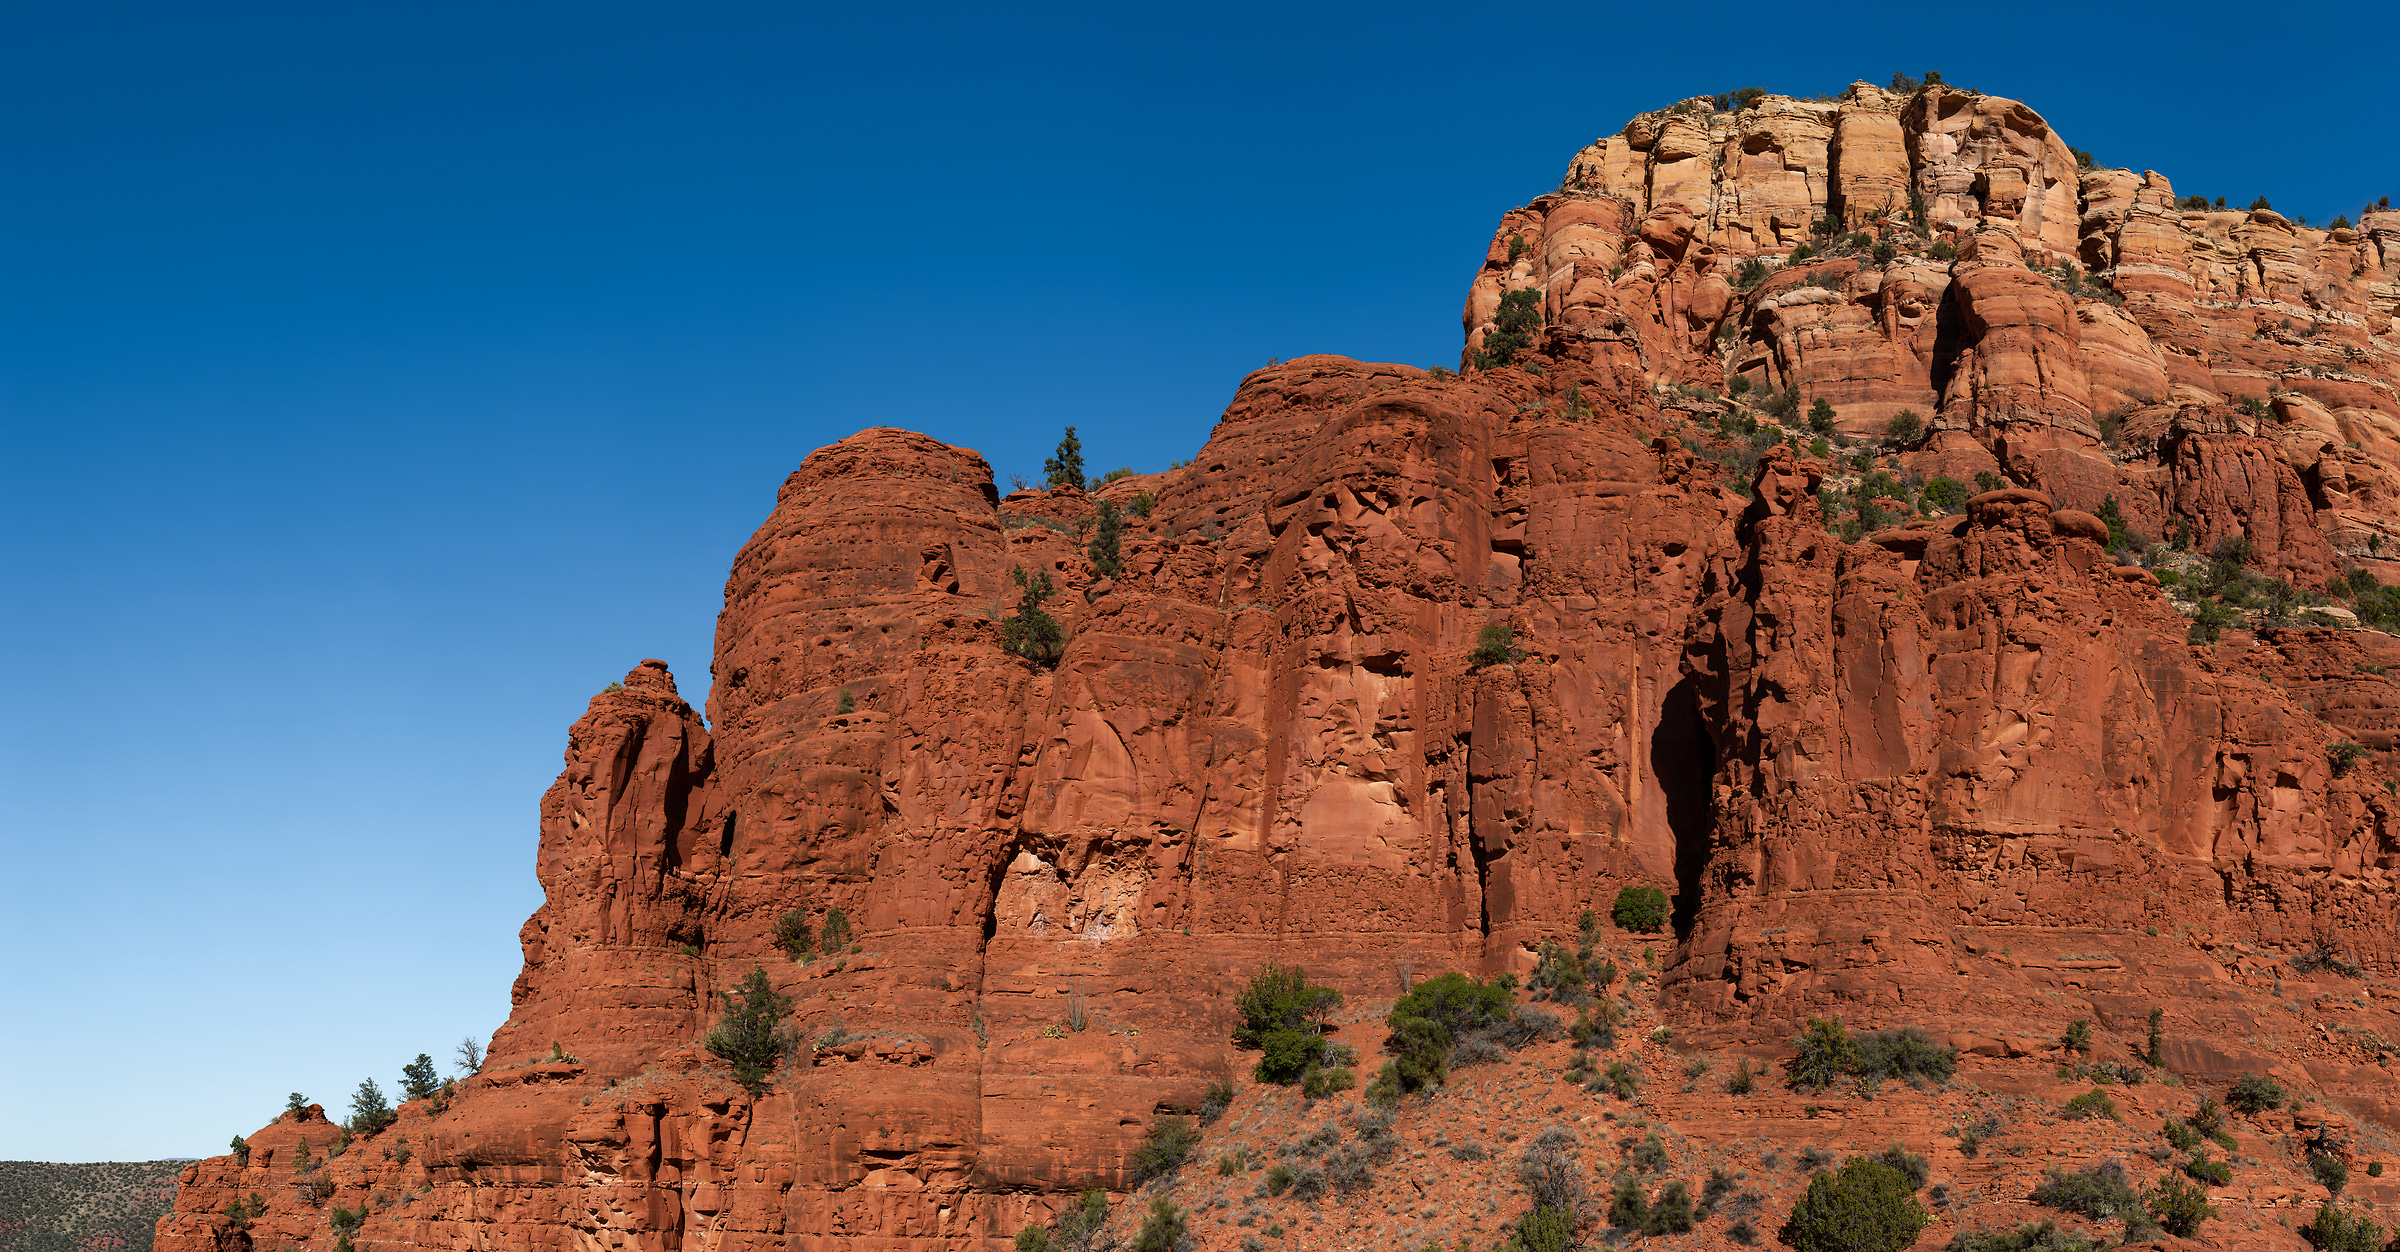 2,125 megapixels! A very high resolution, large-format VAST photo print of a red rock wall; landscape photograph created by Jim Tarpo in Sedona, Arizona.